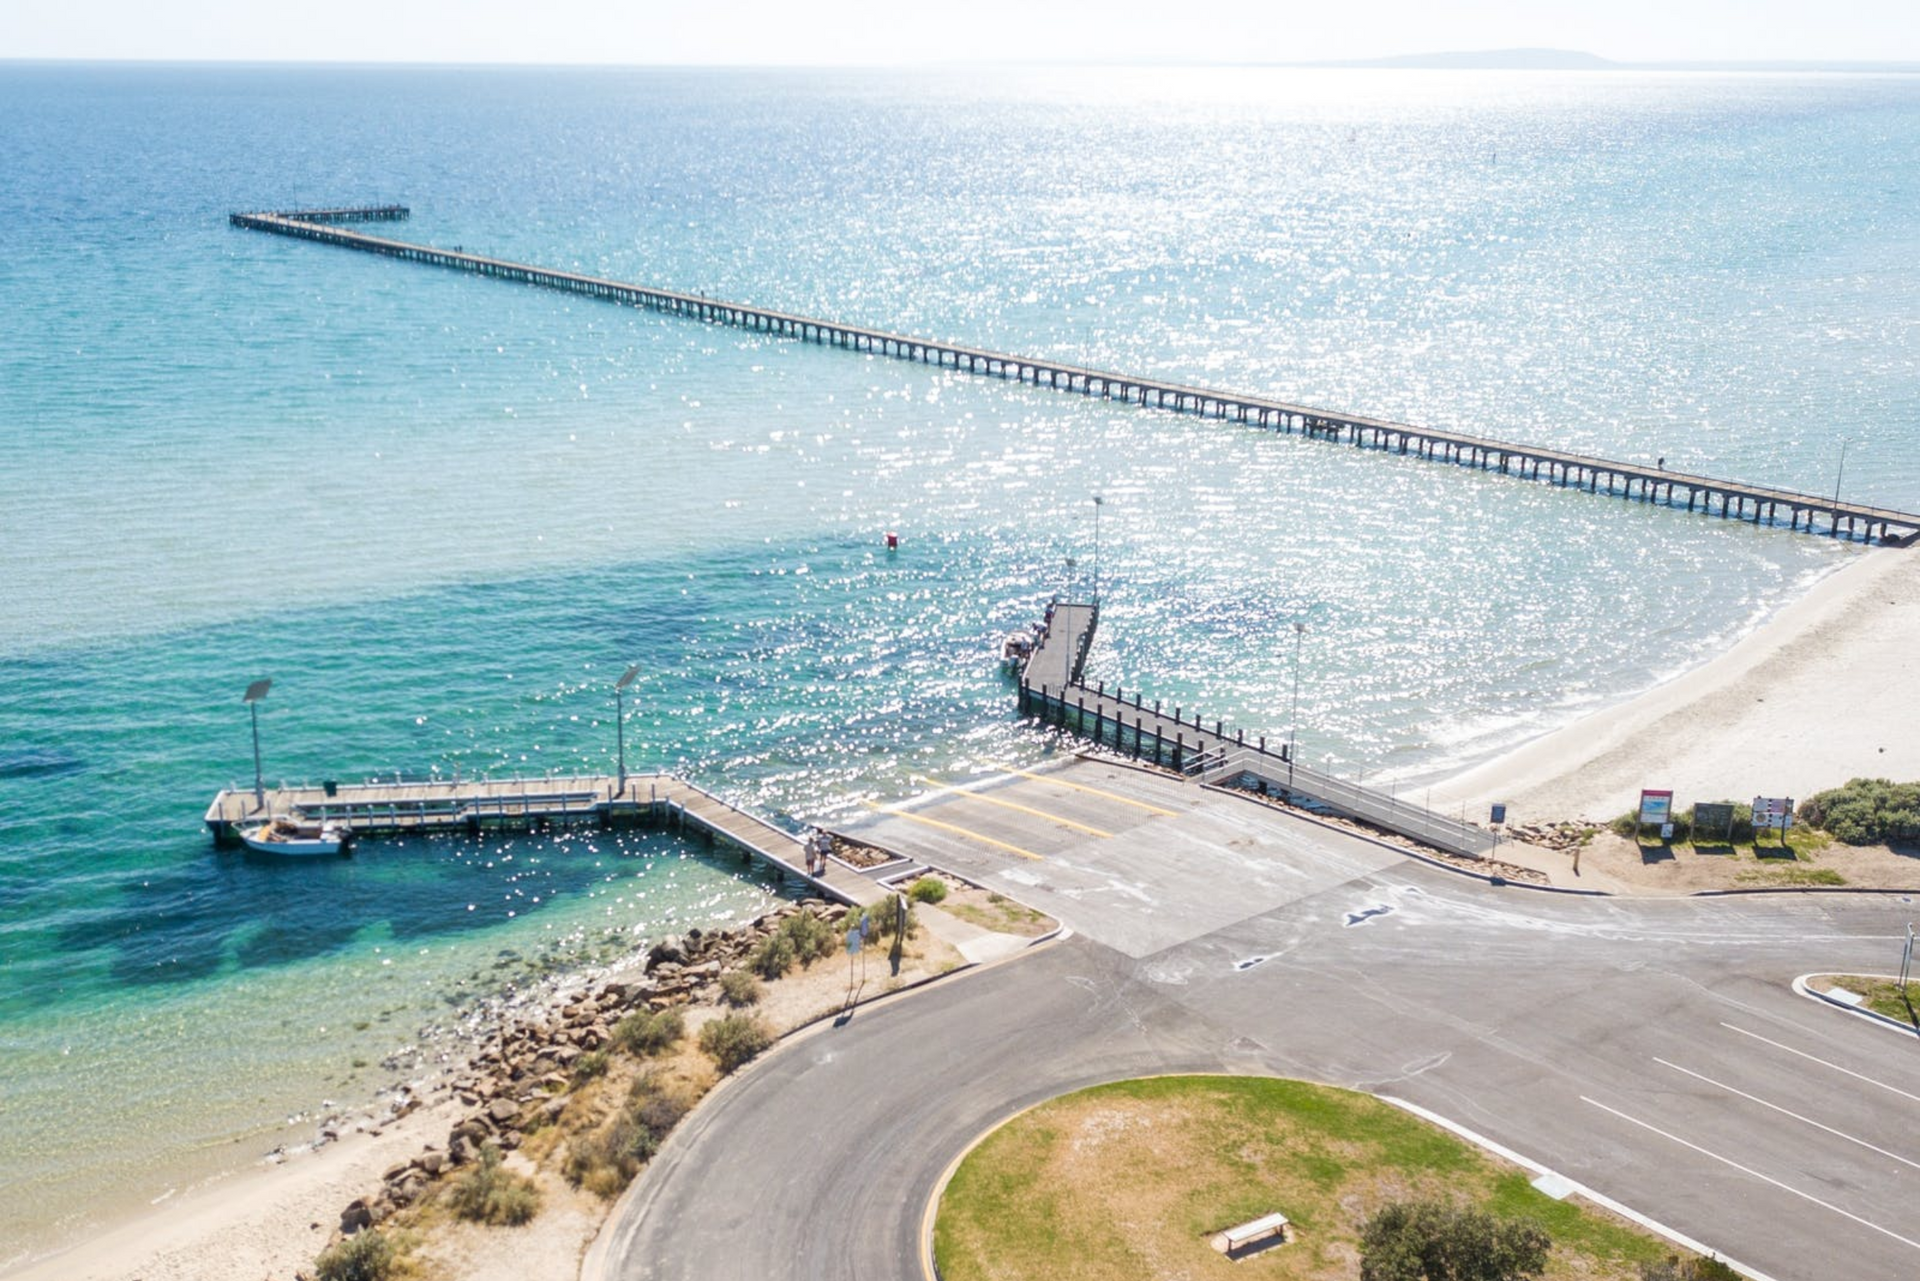 An aerial view of a pier leading into the ocean.